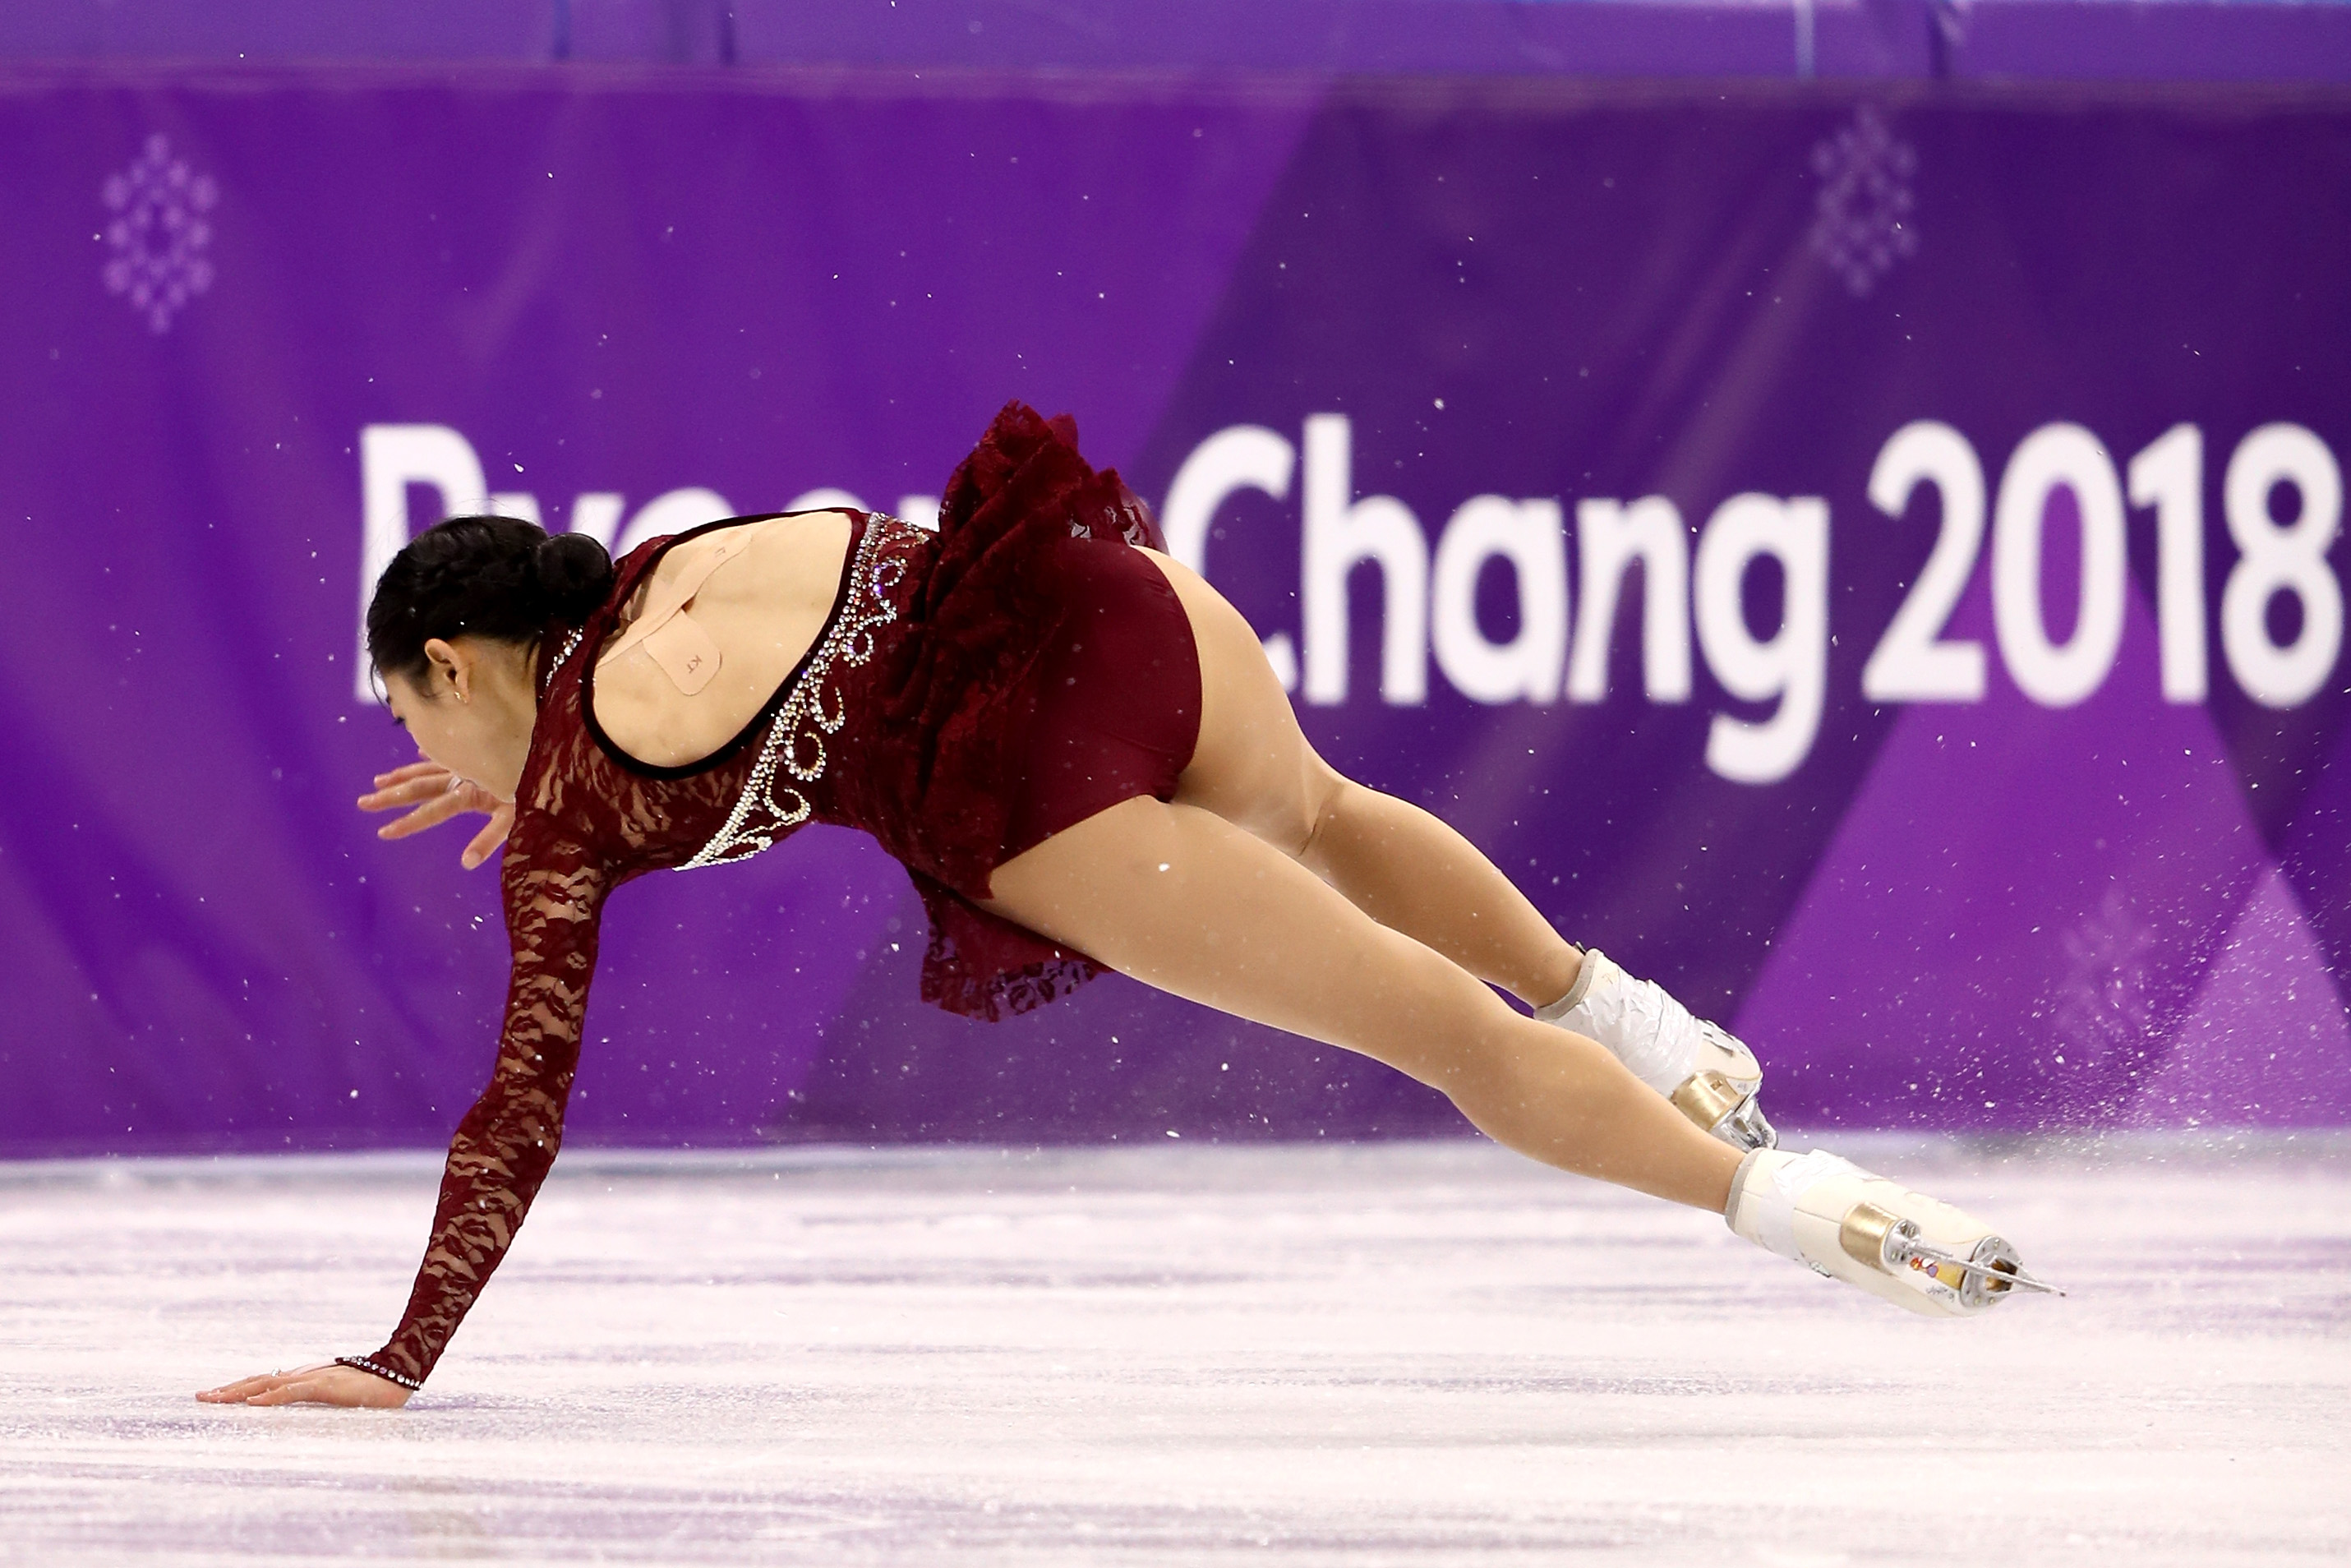 Mirai Nagasu of the United States falls while competing during the Ladies Single Skating Short Program on day twelve of the PyeongChang 2018 Winter Olympic Games at Gangneung Ice Arena on February 21, 2018 in Gangneung, South Korea (Jamie Squire - Getty Images)